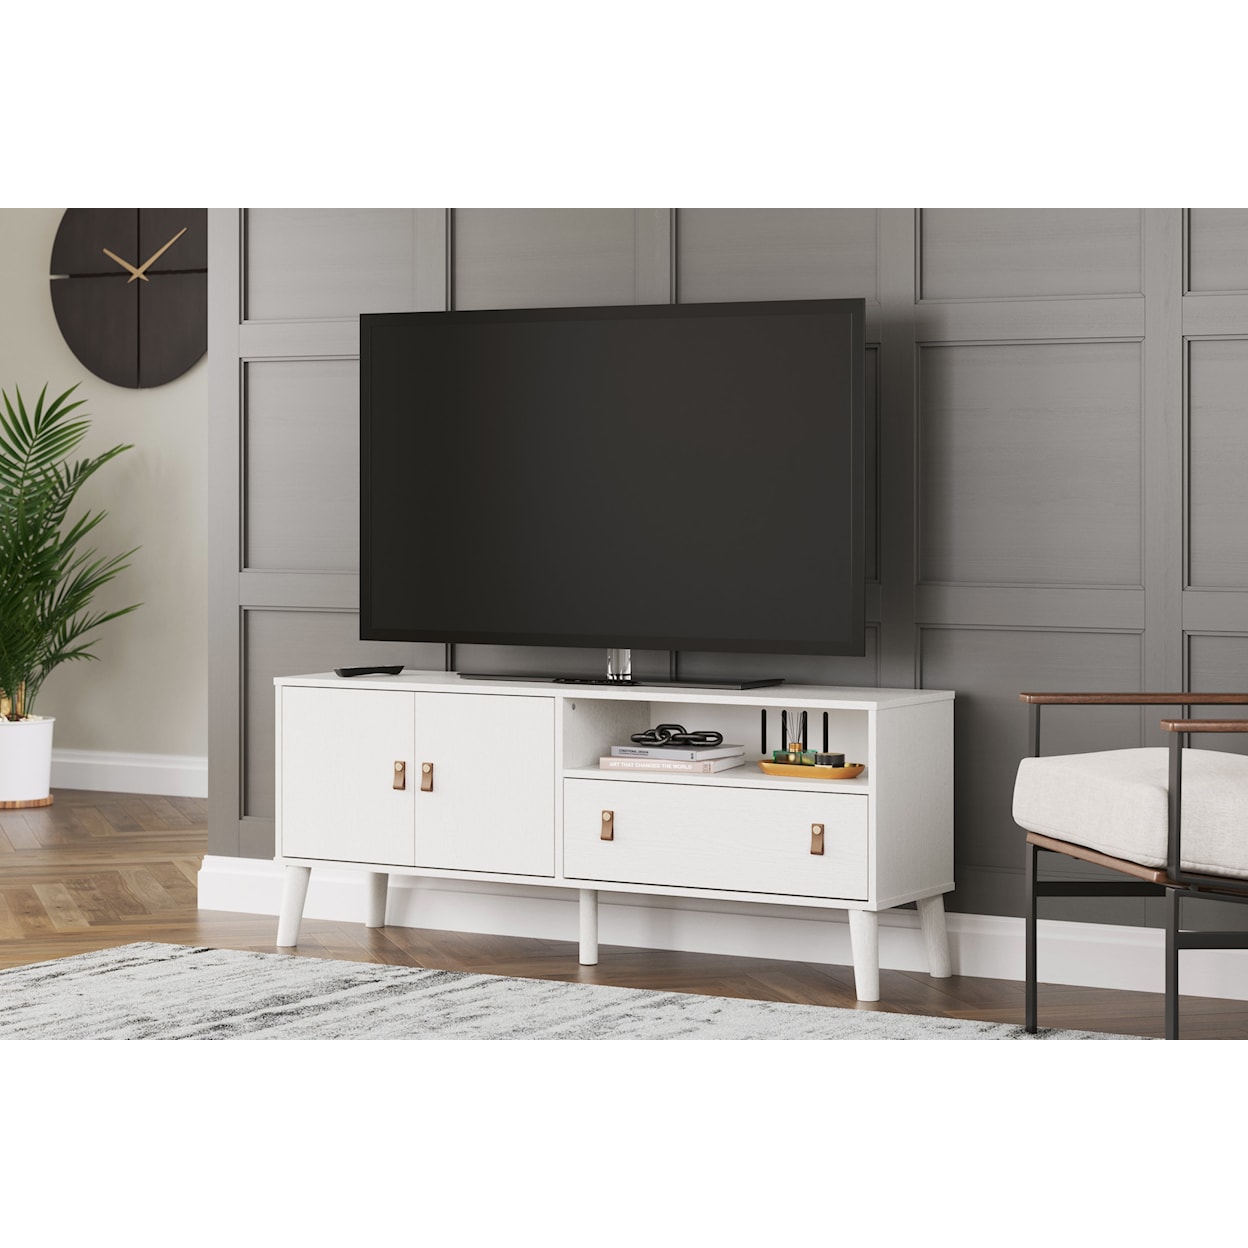 Signature Design by Ashley Aprilyn 59" TV Stand